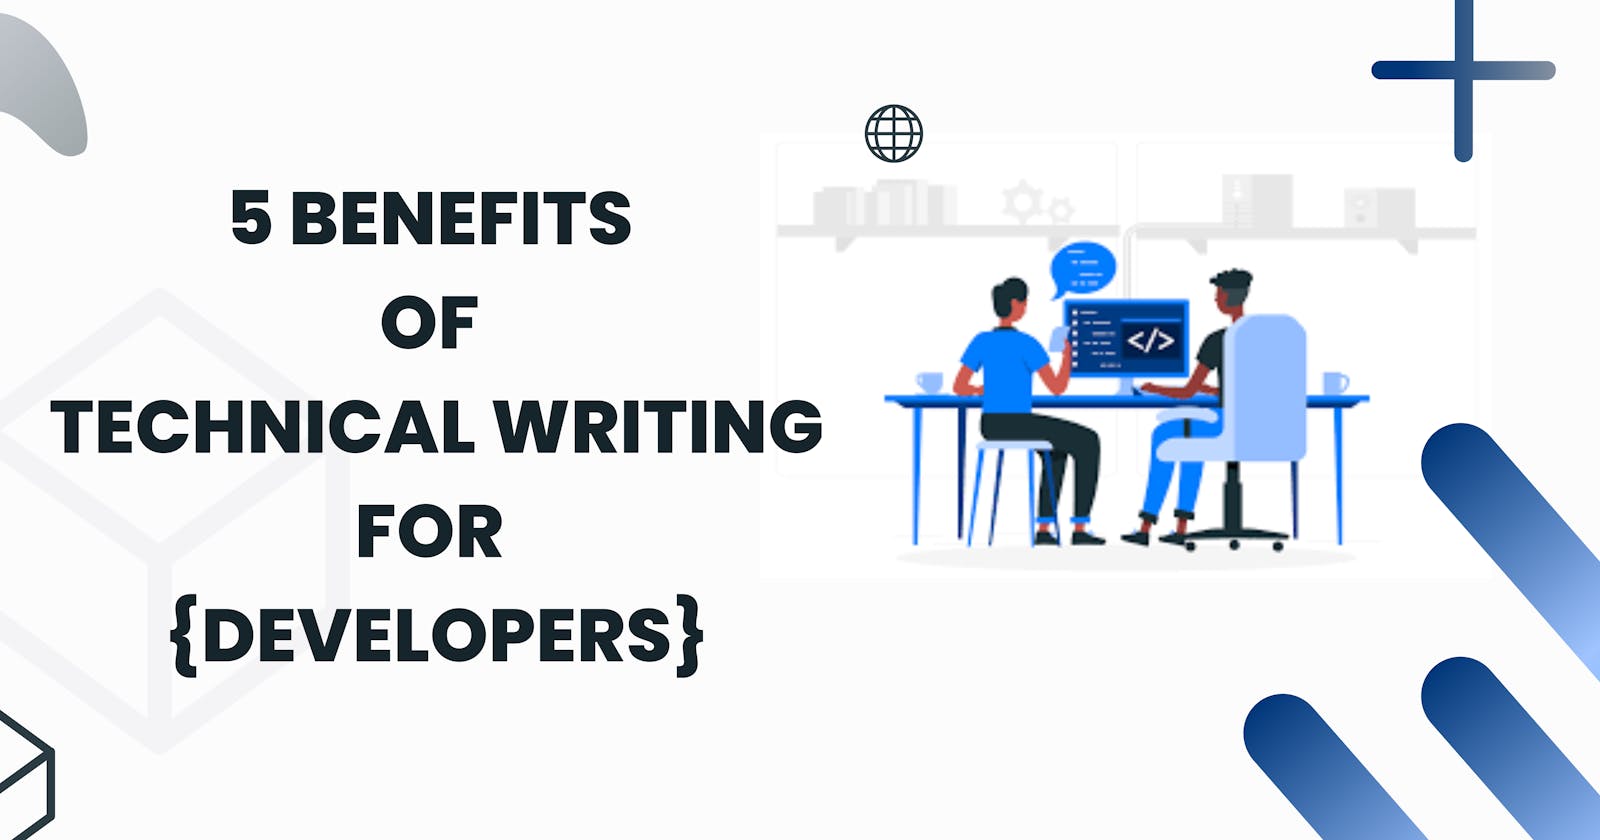 5 Benefits of Technical Writing for Developers